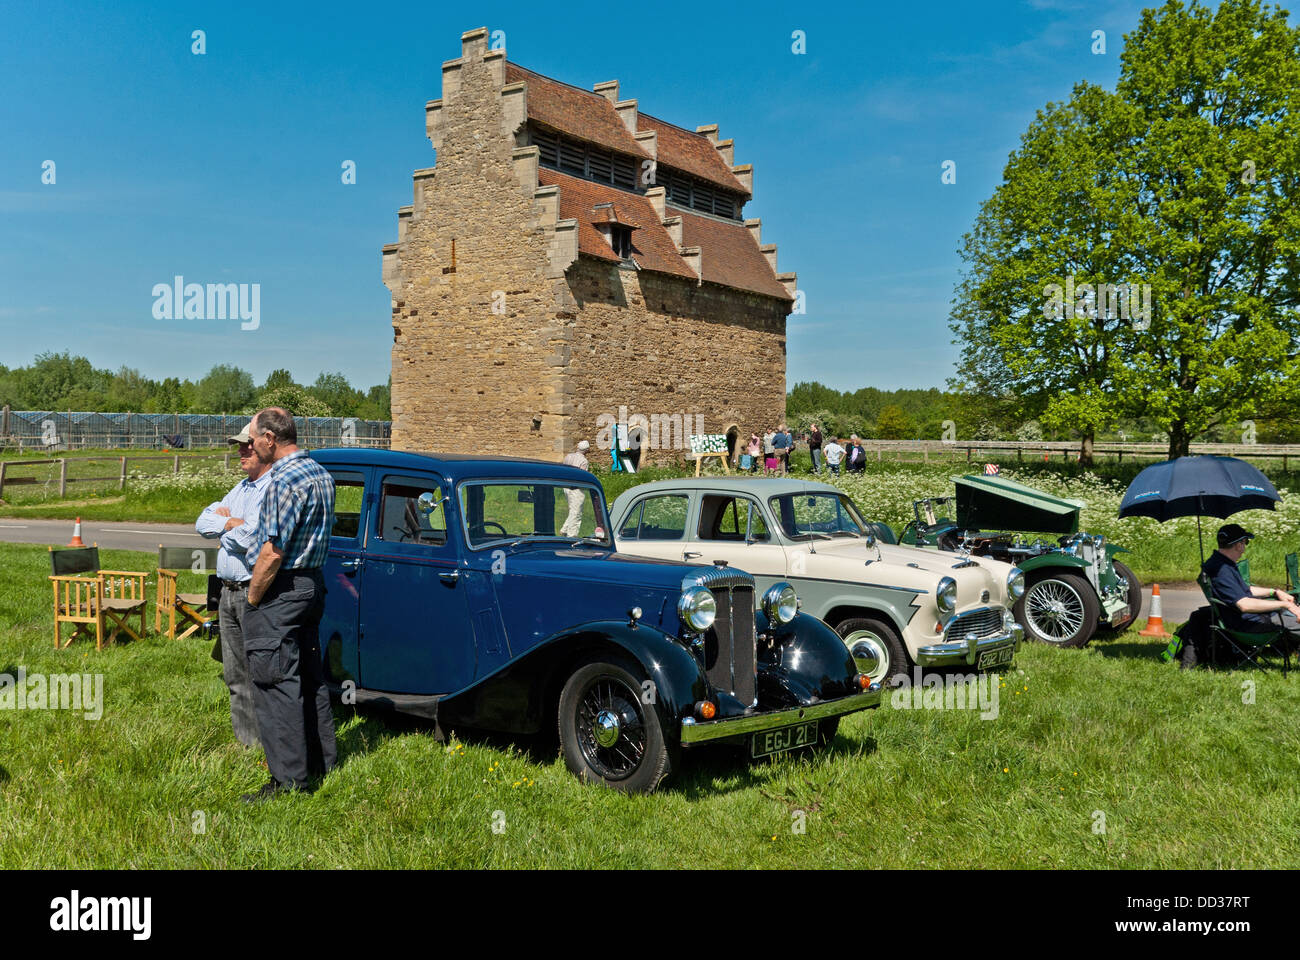 Vintage car rally in the village of Willington, with the National Trust owned Willington Dovecote in the background. Taken from a public highway. Stock Photo